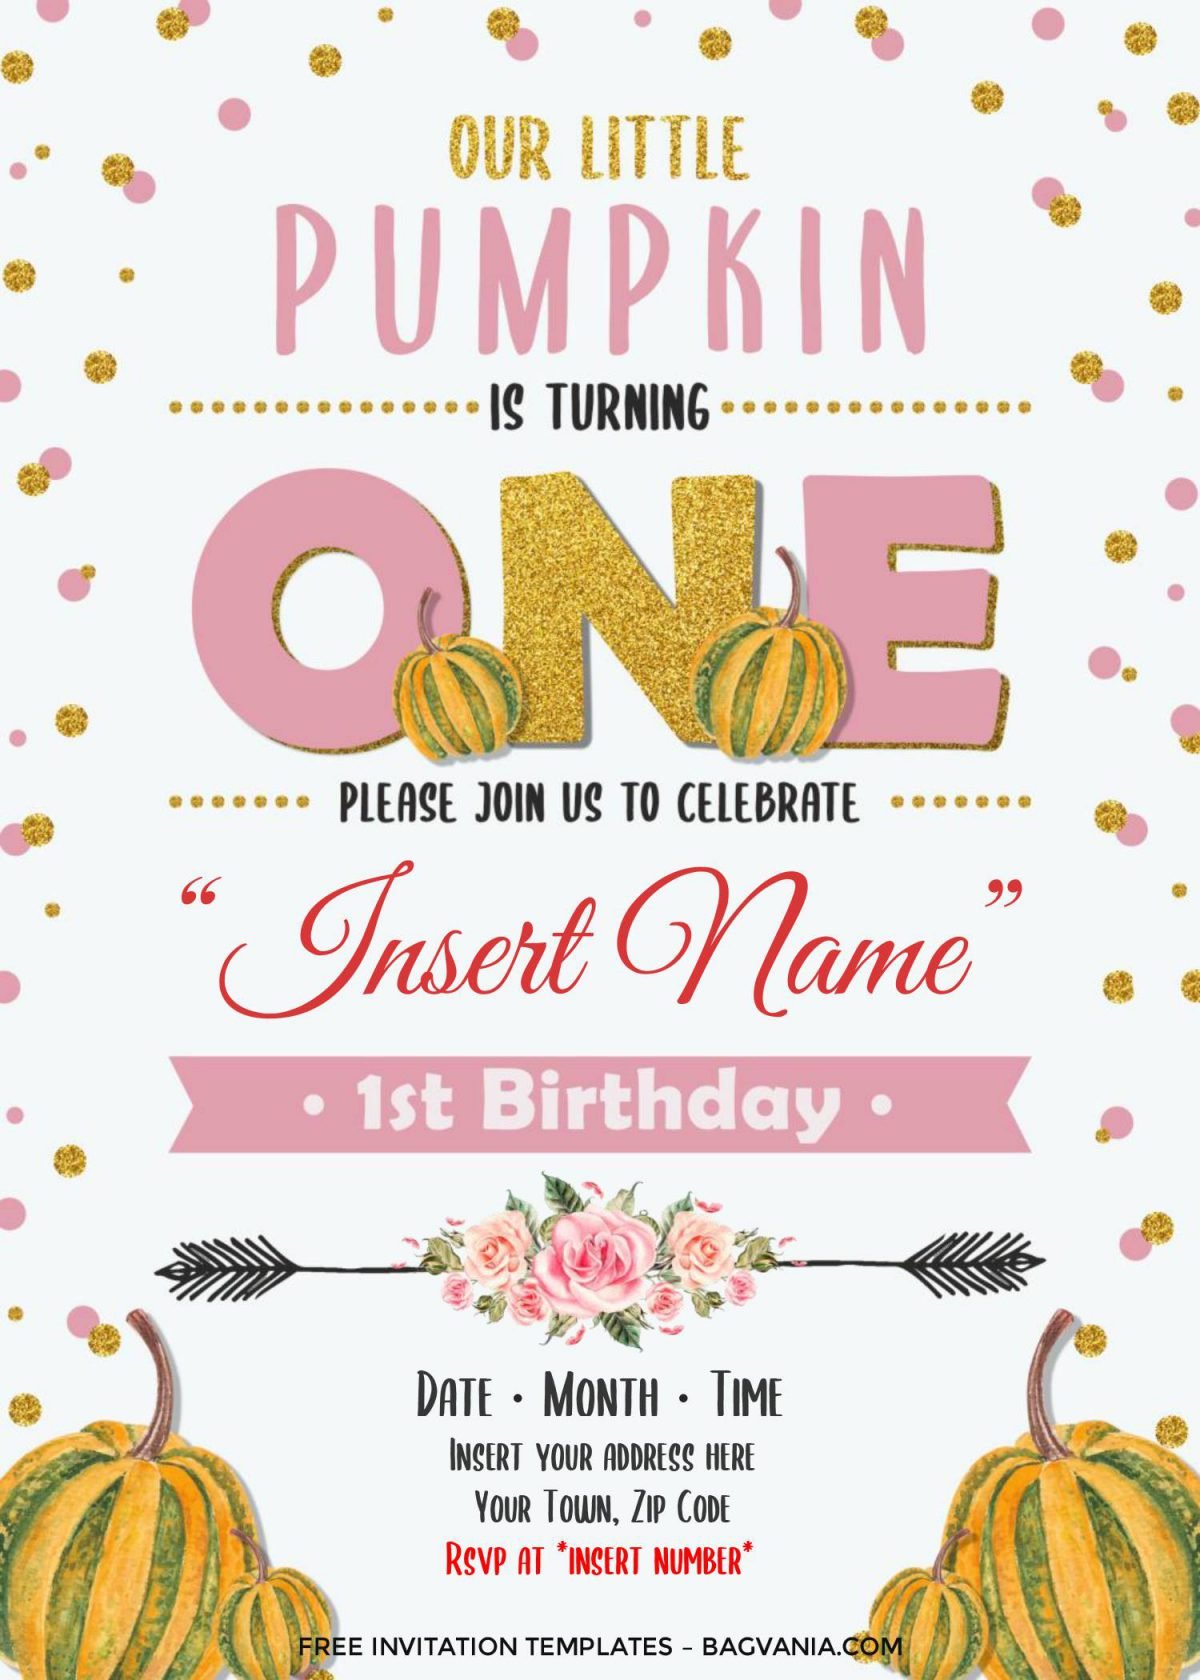 Free Pumpkin First Birthday Invitation Templates For Word and has cute and chic font styles